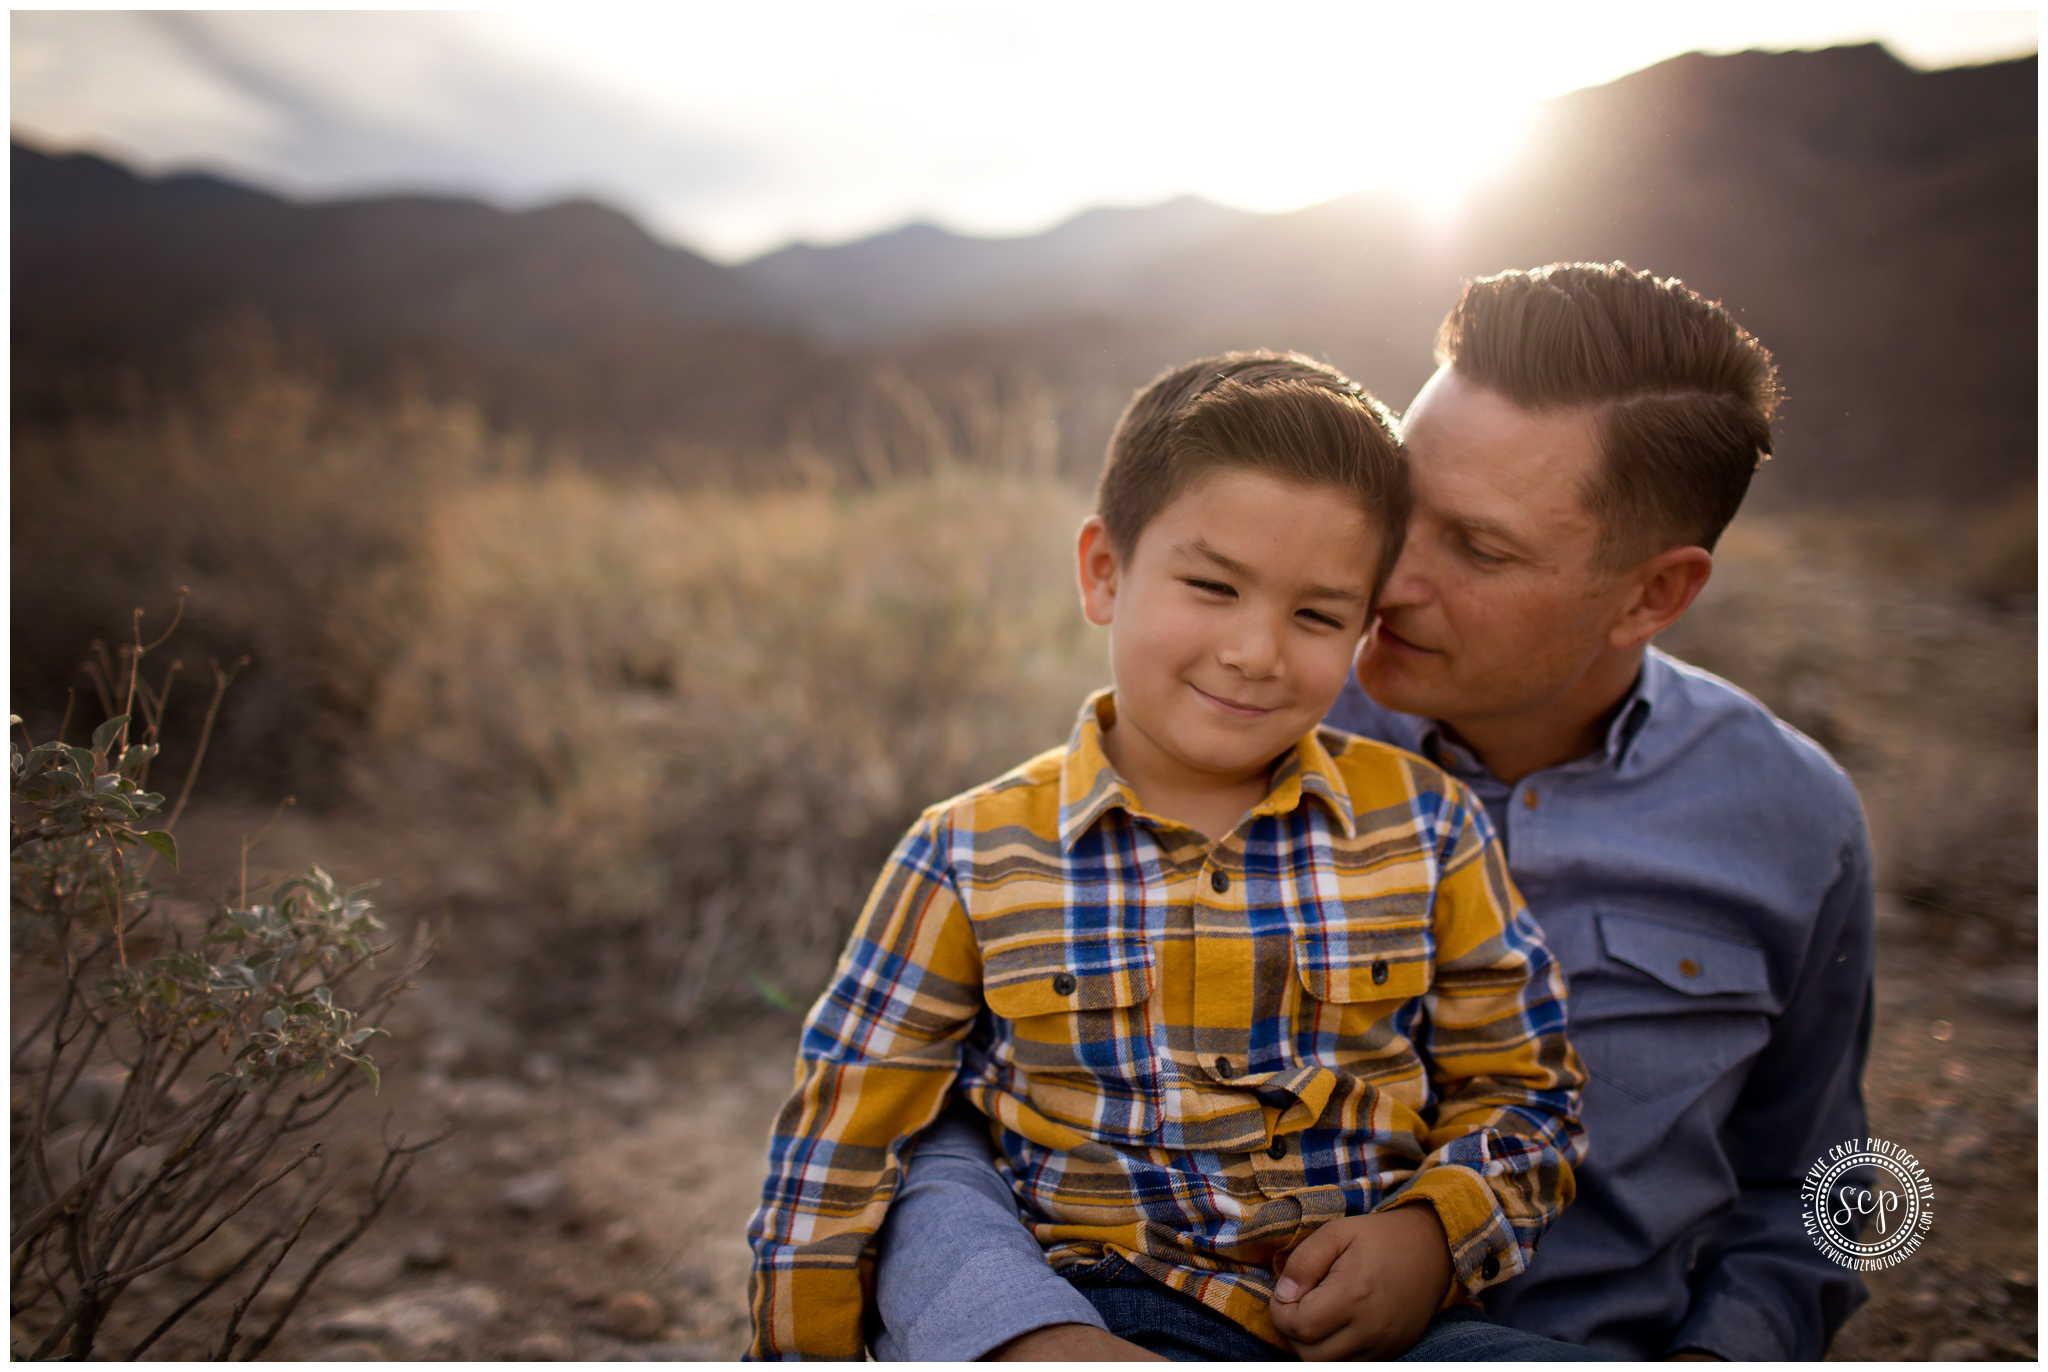 Love this photo of son and dad came out. California's Palm desert is great for family photo shoots.